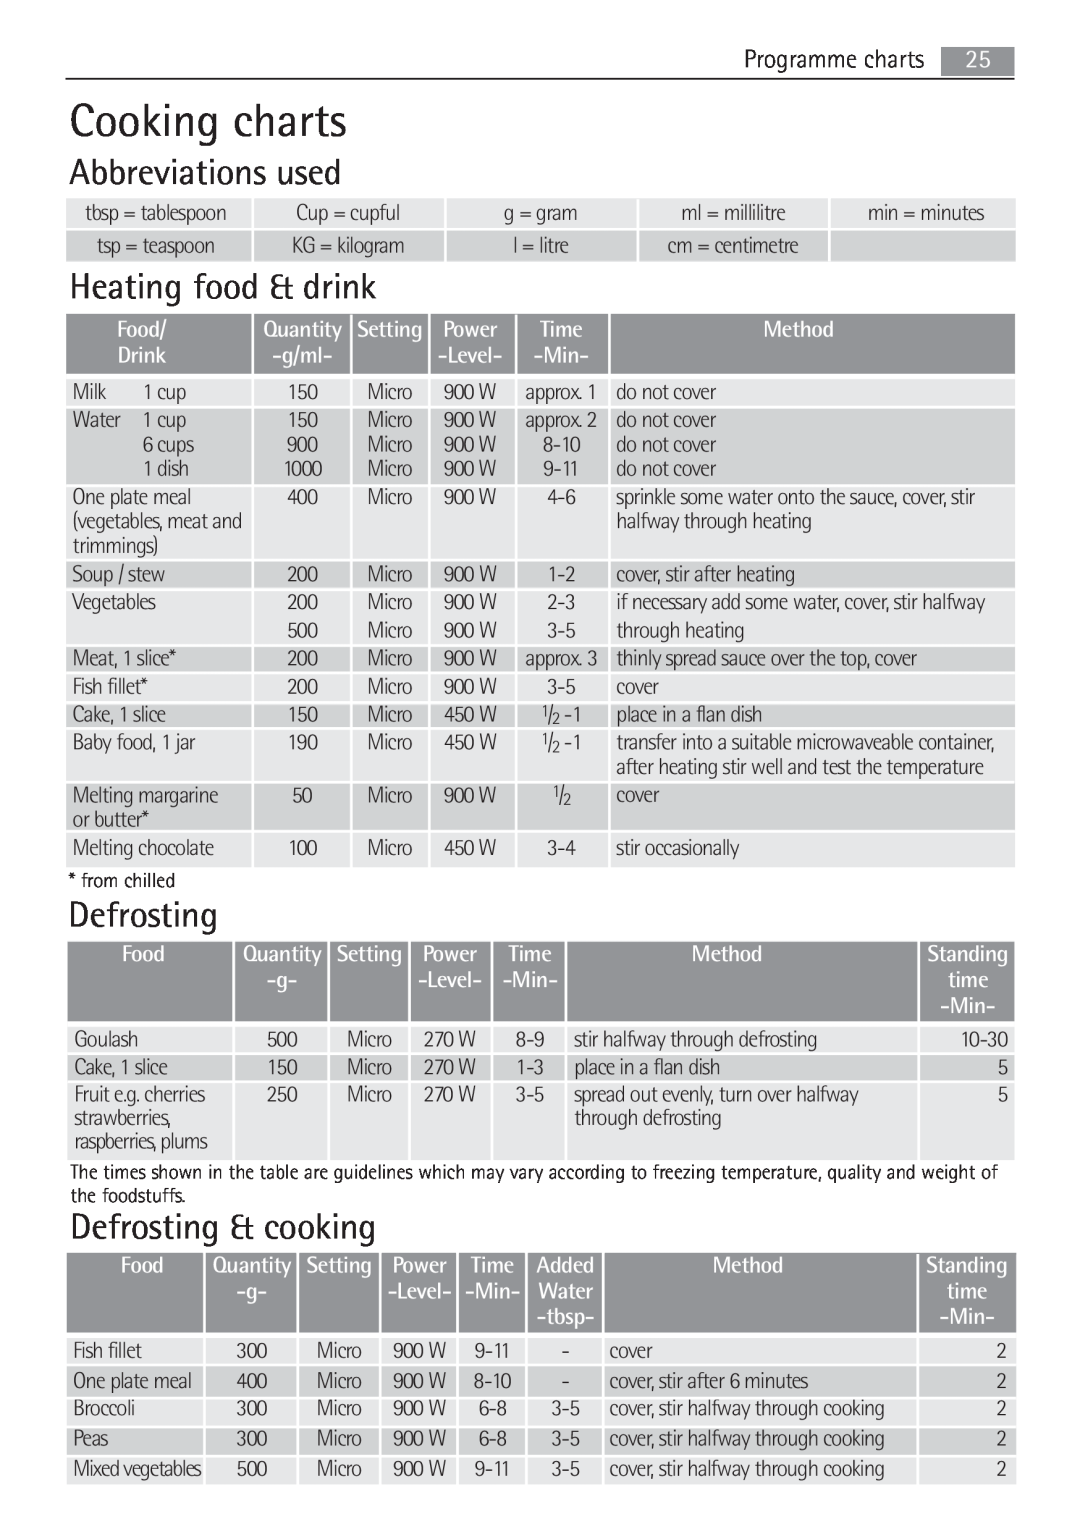 AEG MCD2662E user manual Heating food & drink, Defrosting & cooking, Abbreviations used, Cooking charts 